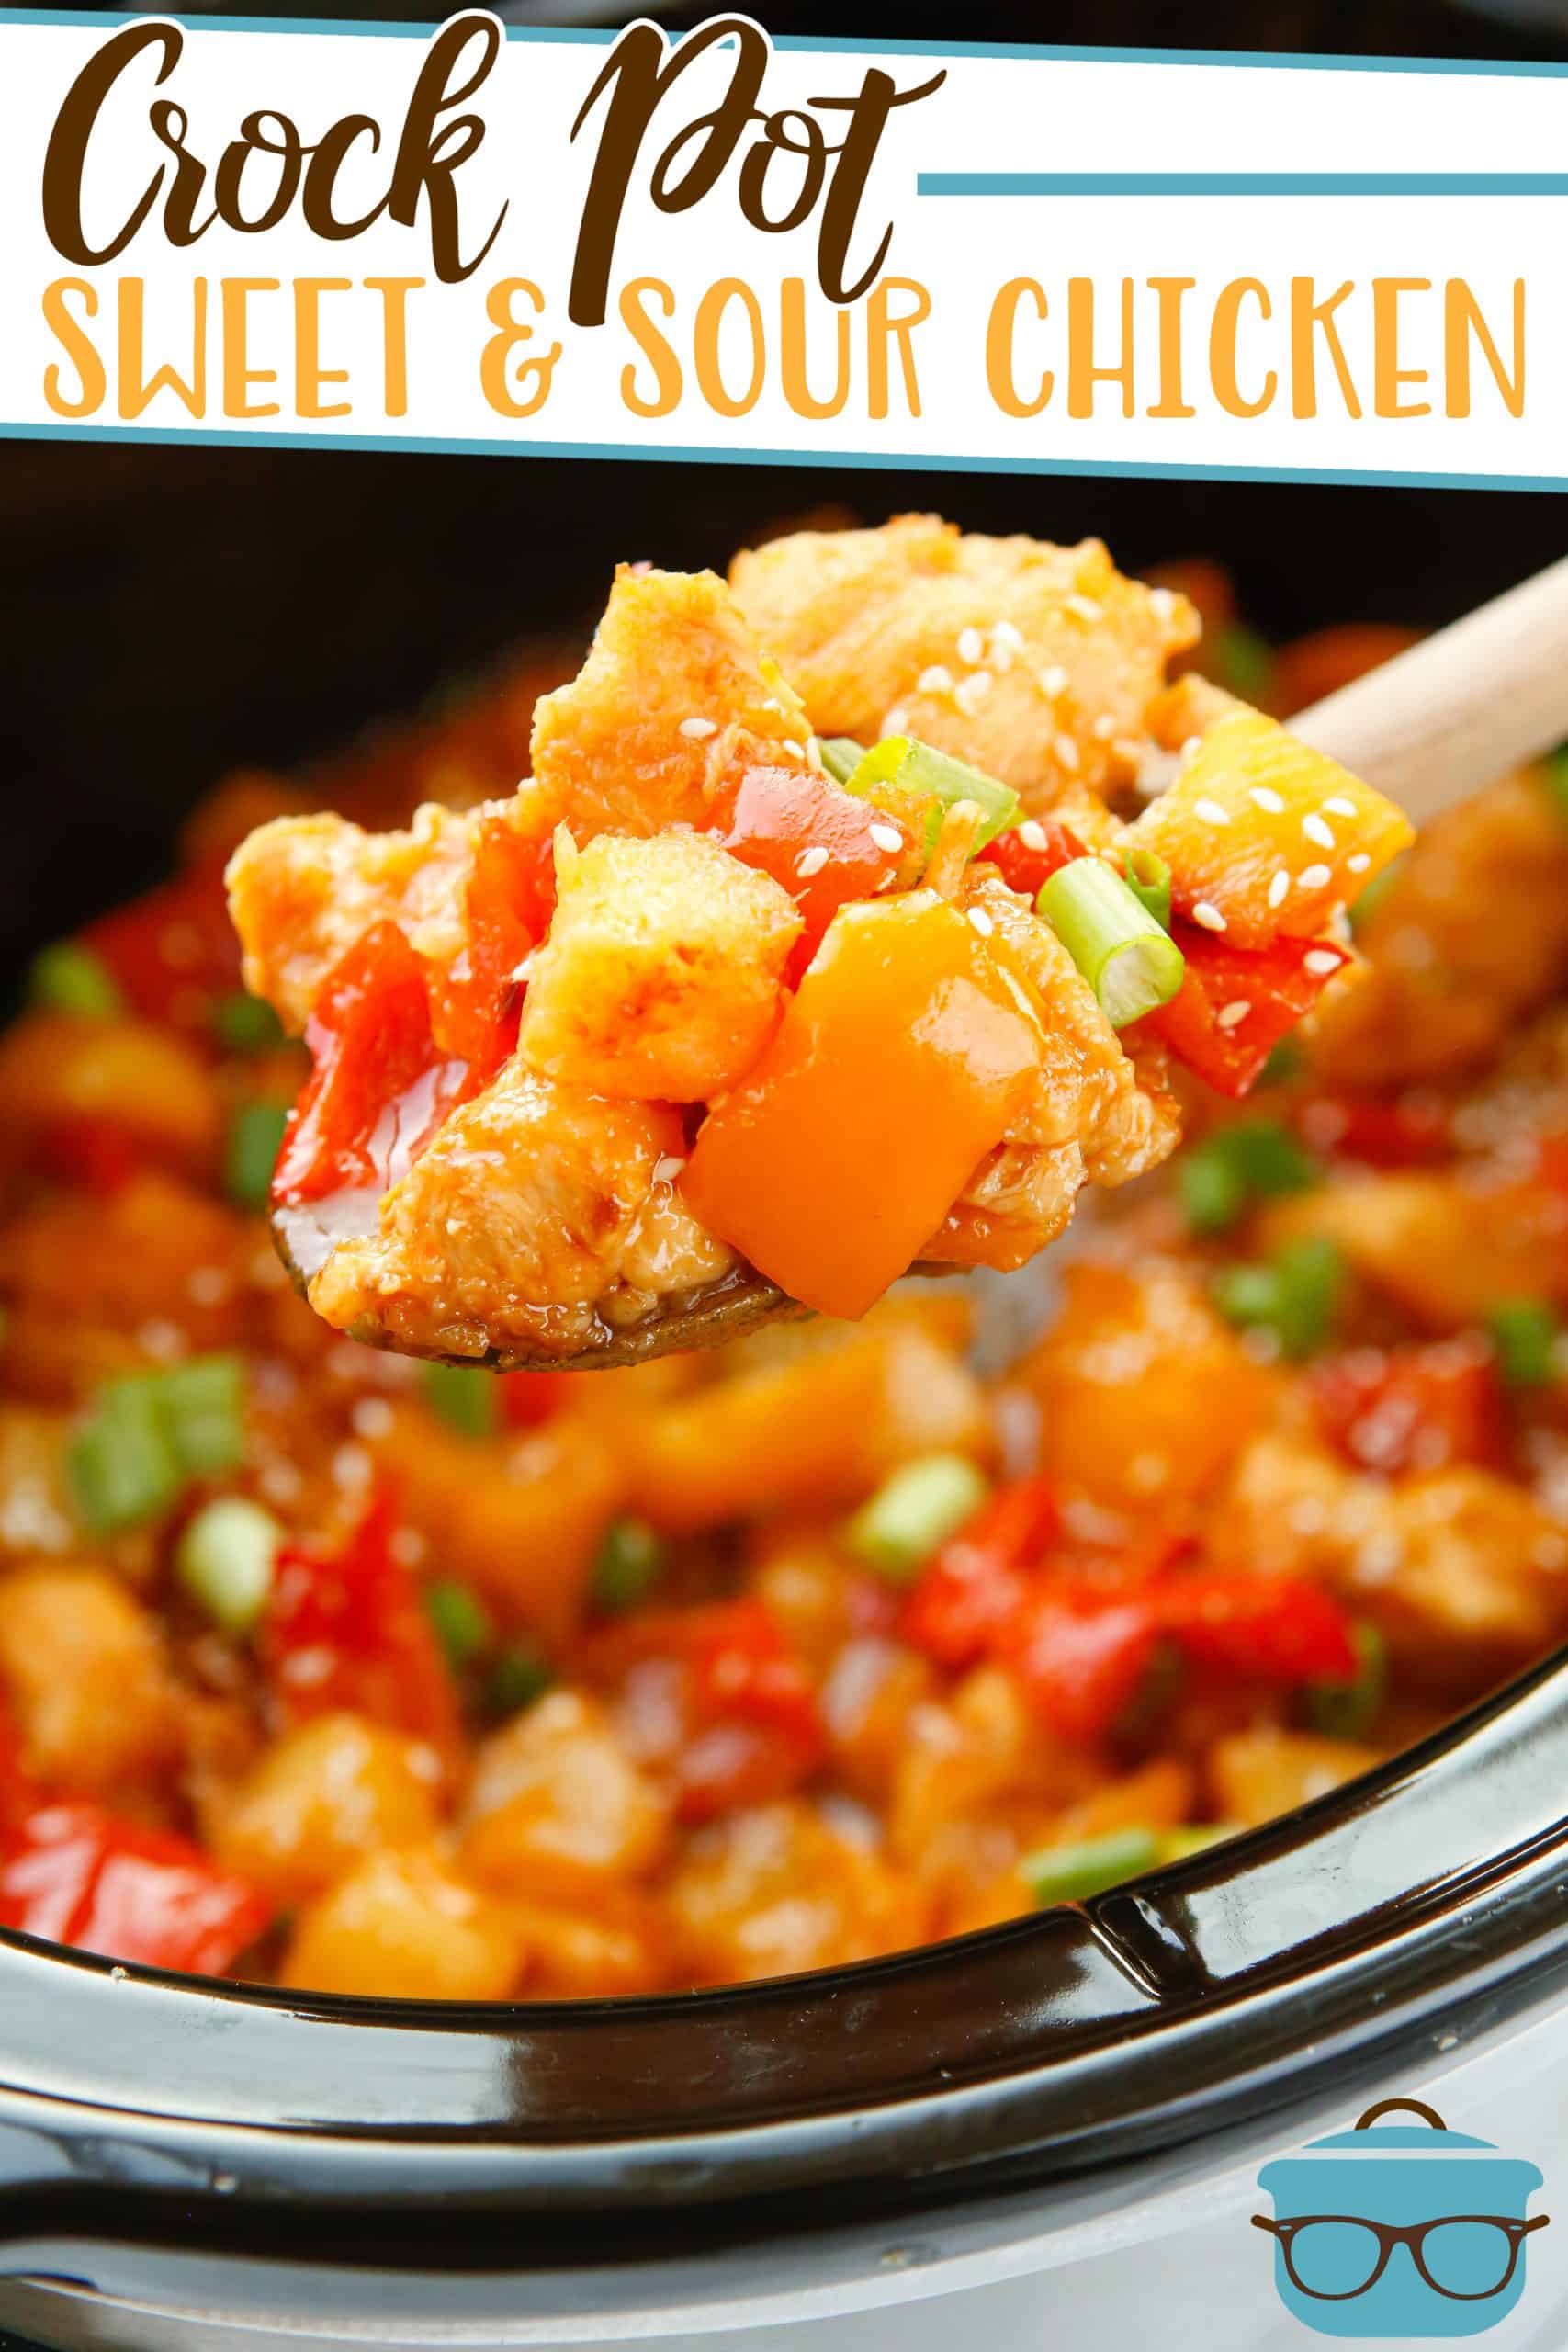 Crock Pot Sweet and Sour Chicken from The Country Cook, shown in a crock pot with a wooden spoon scooping some out.